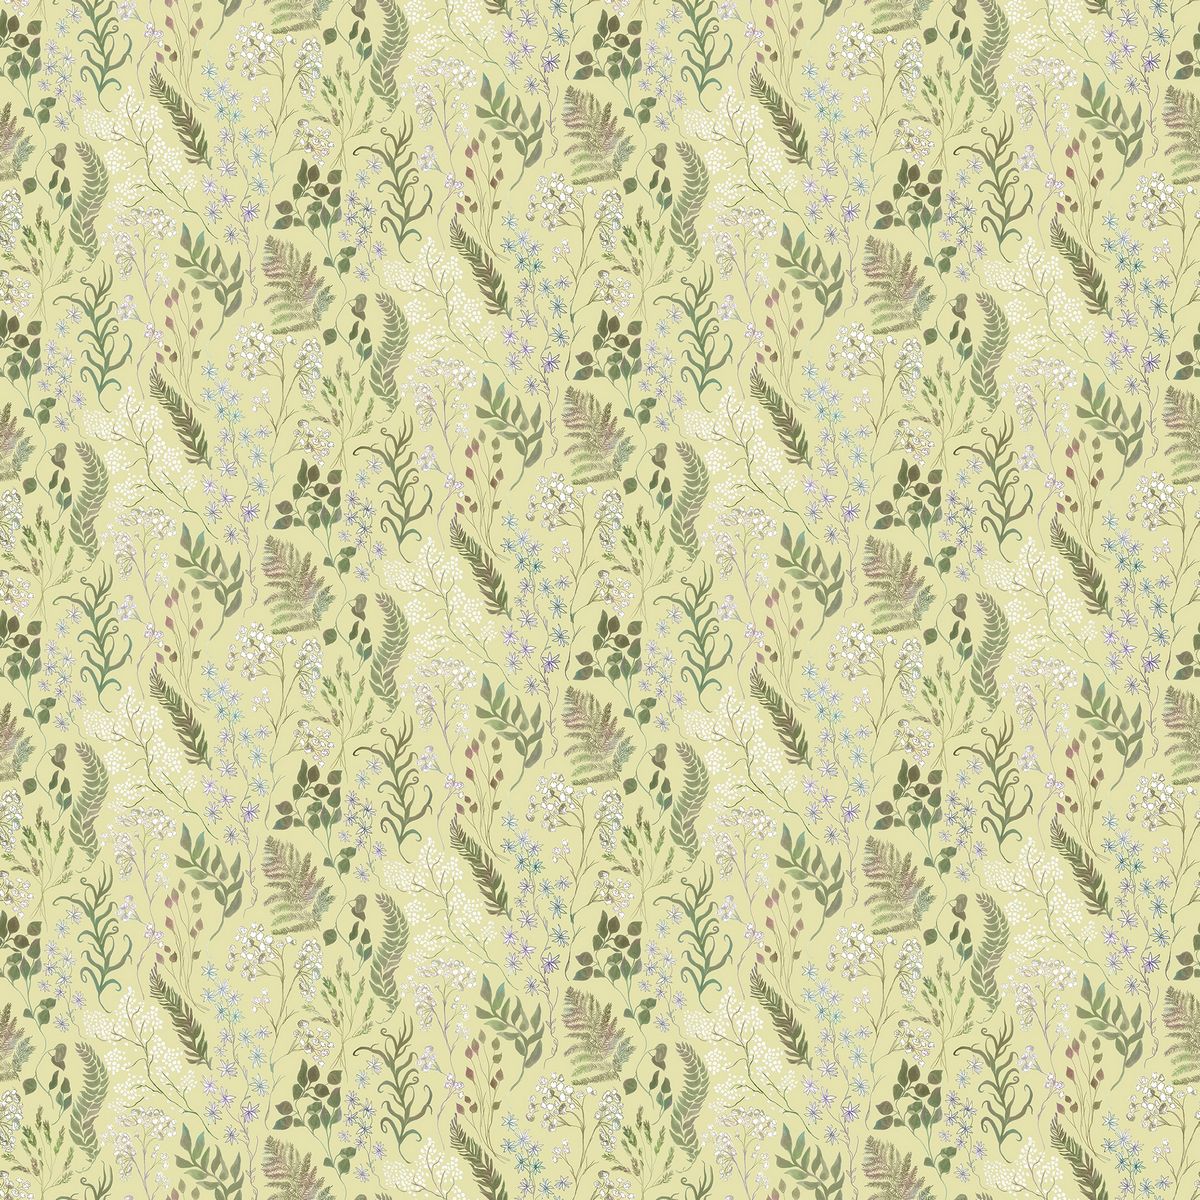 Aileana Pear Fabric by Voyage Maison